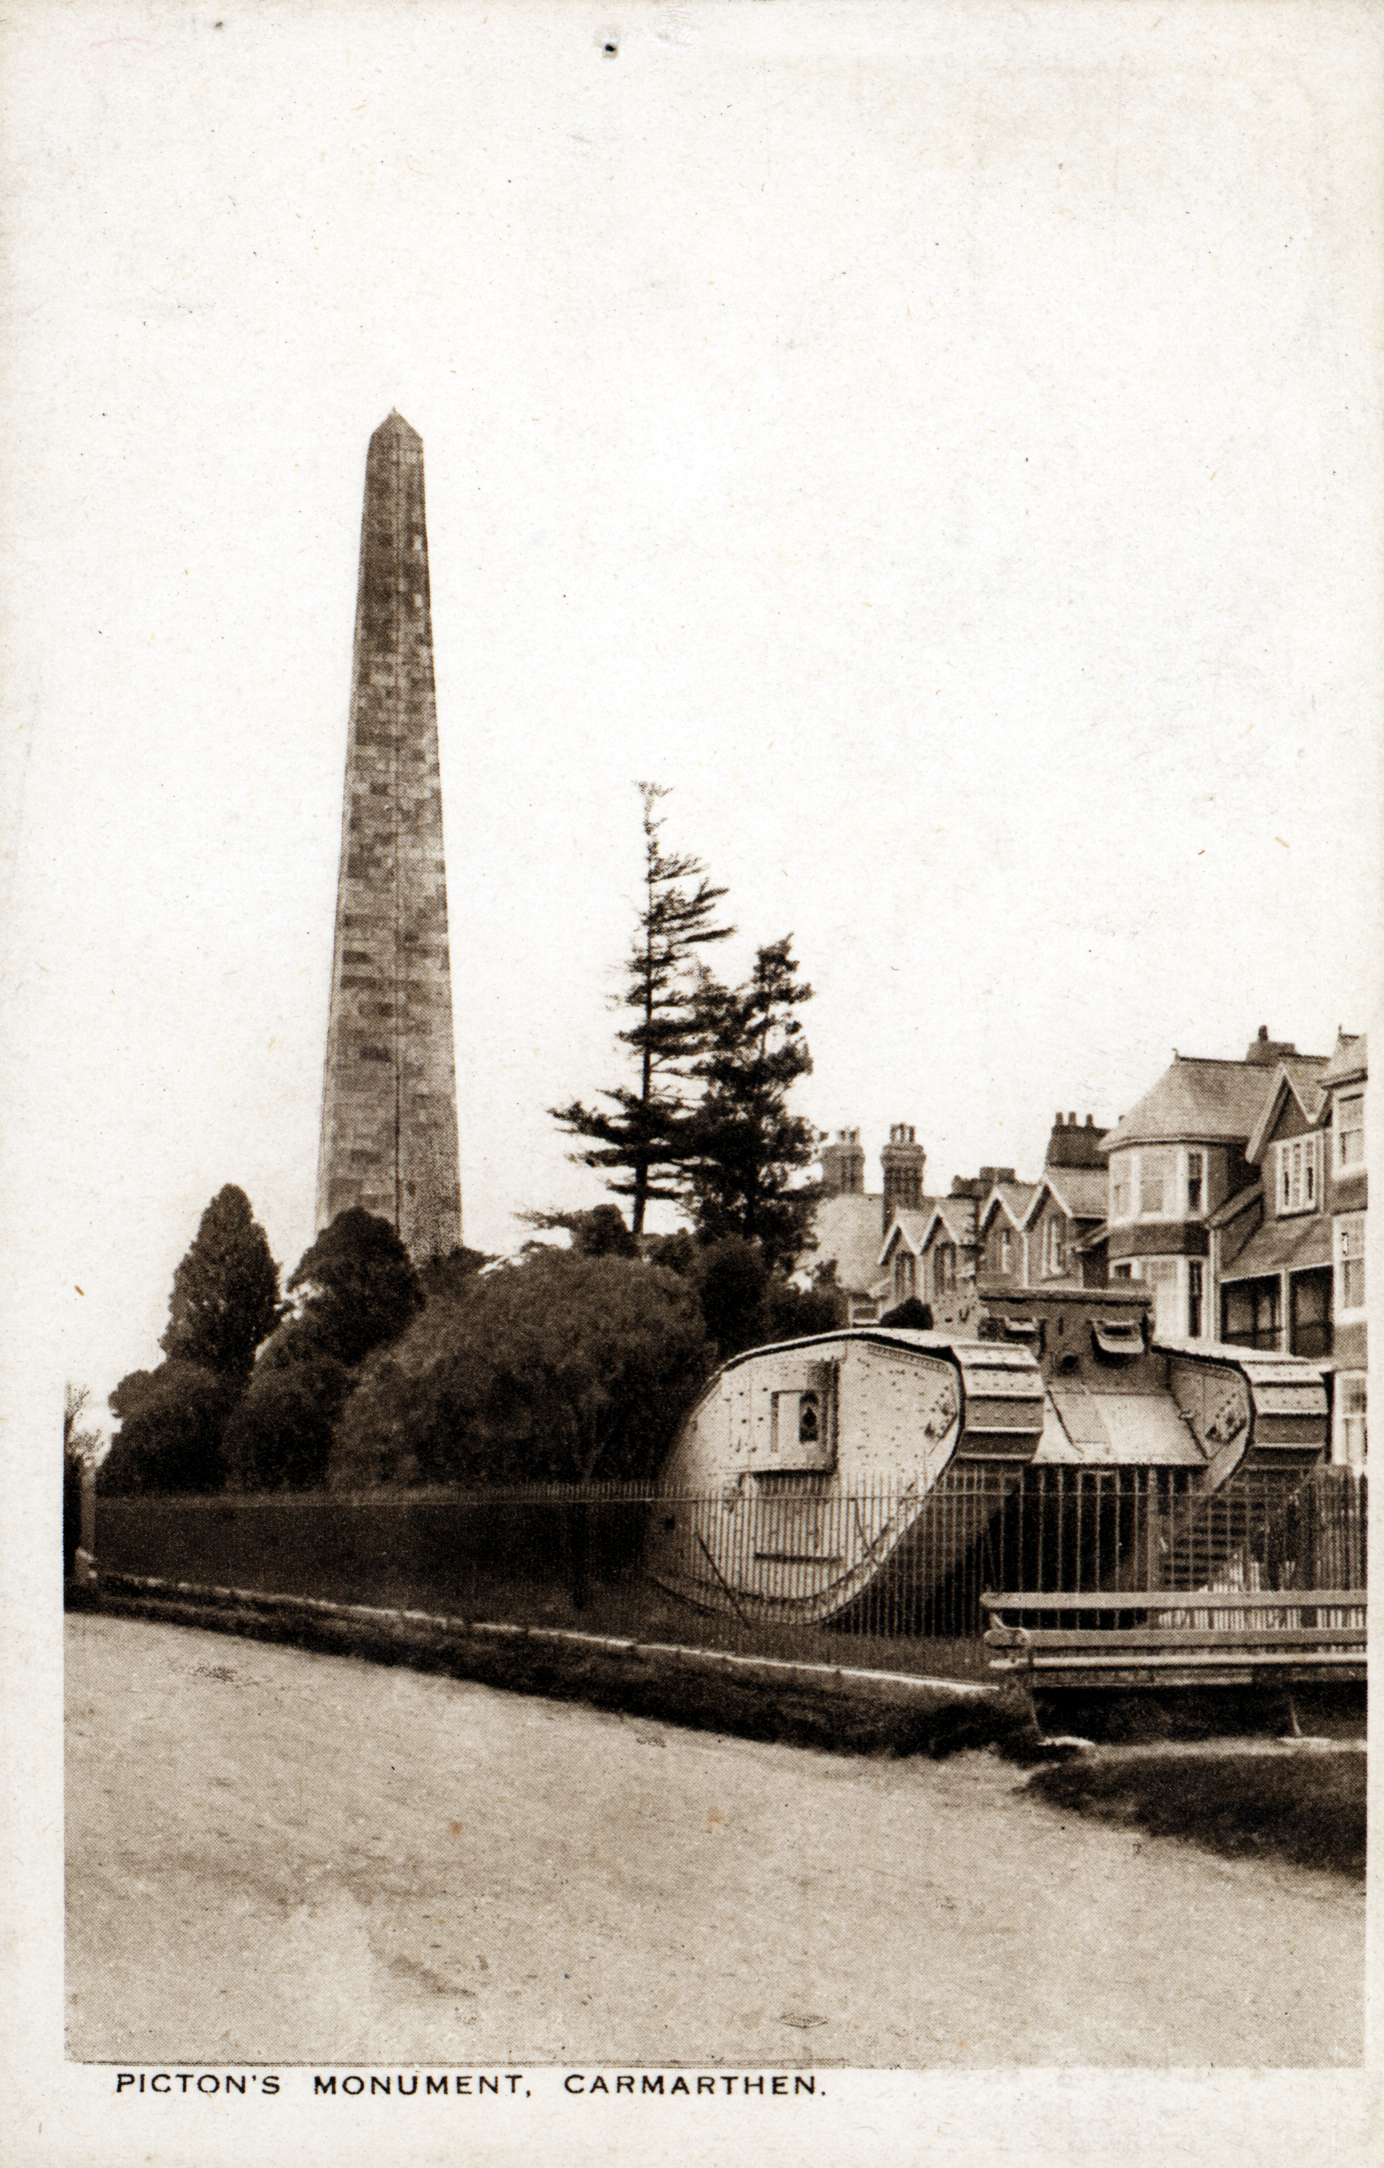 Black and white photograph/ postcard of the tank situated beneath Picton's monument, Carmarthen.